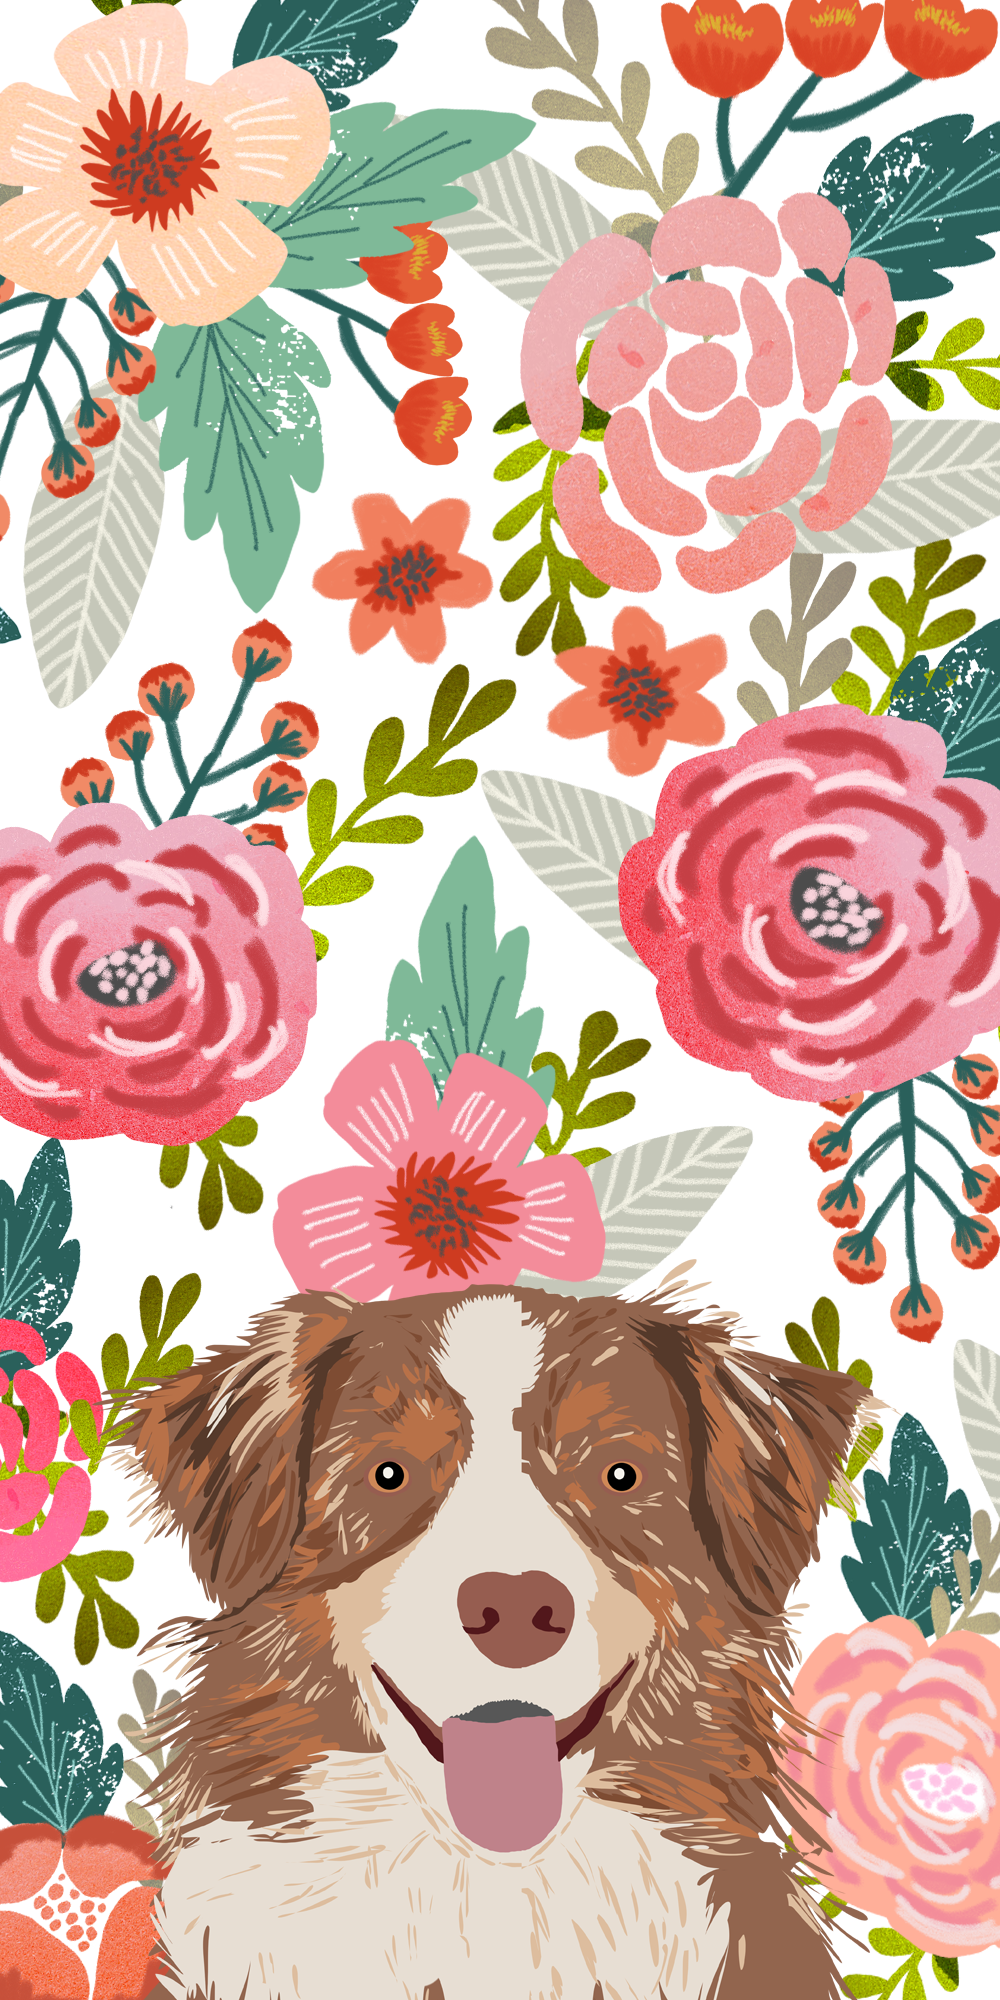 dogs #Floral #Crown. #Casetify #iPhone #Art #Design #Animals #wallpaper #ideas. iPhone wallpaper pattern, Wallpaper iphone cute, Pink wallpaper iphone